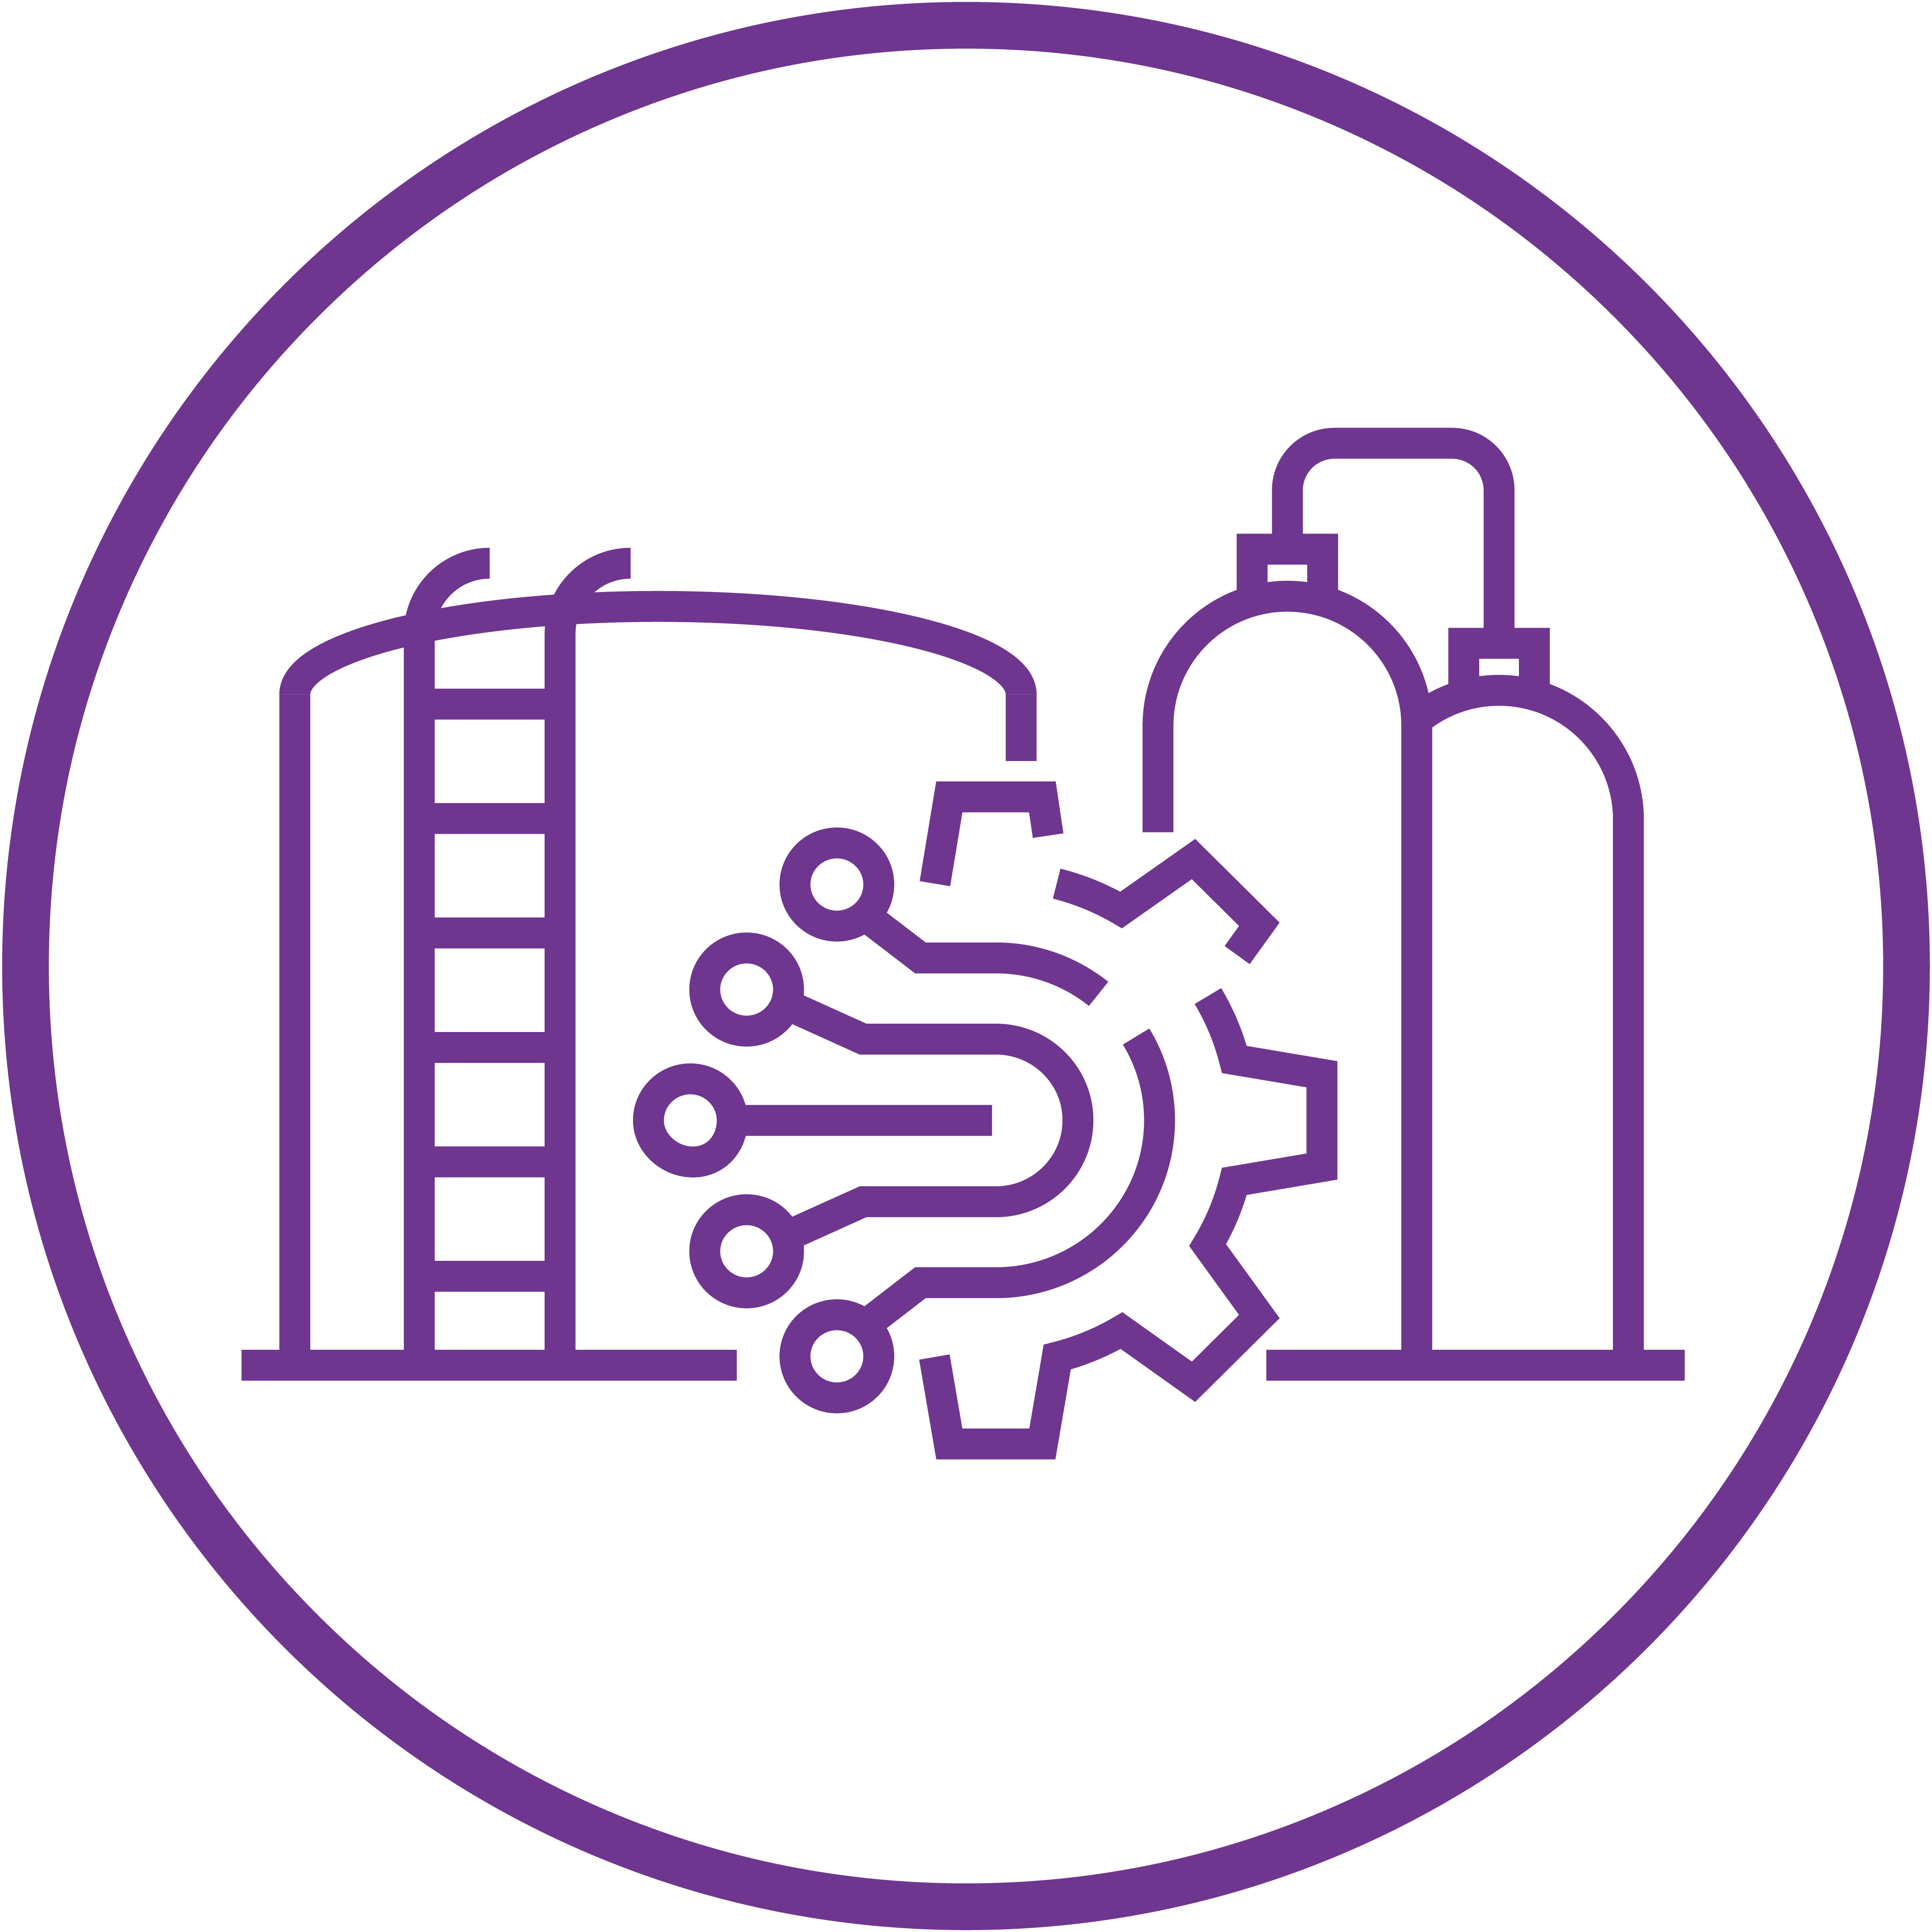 Sector-specific Industry Digital Plans: An icon representing the process construction and maintenance (engineering services) sector